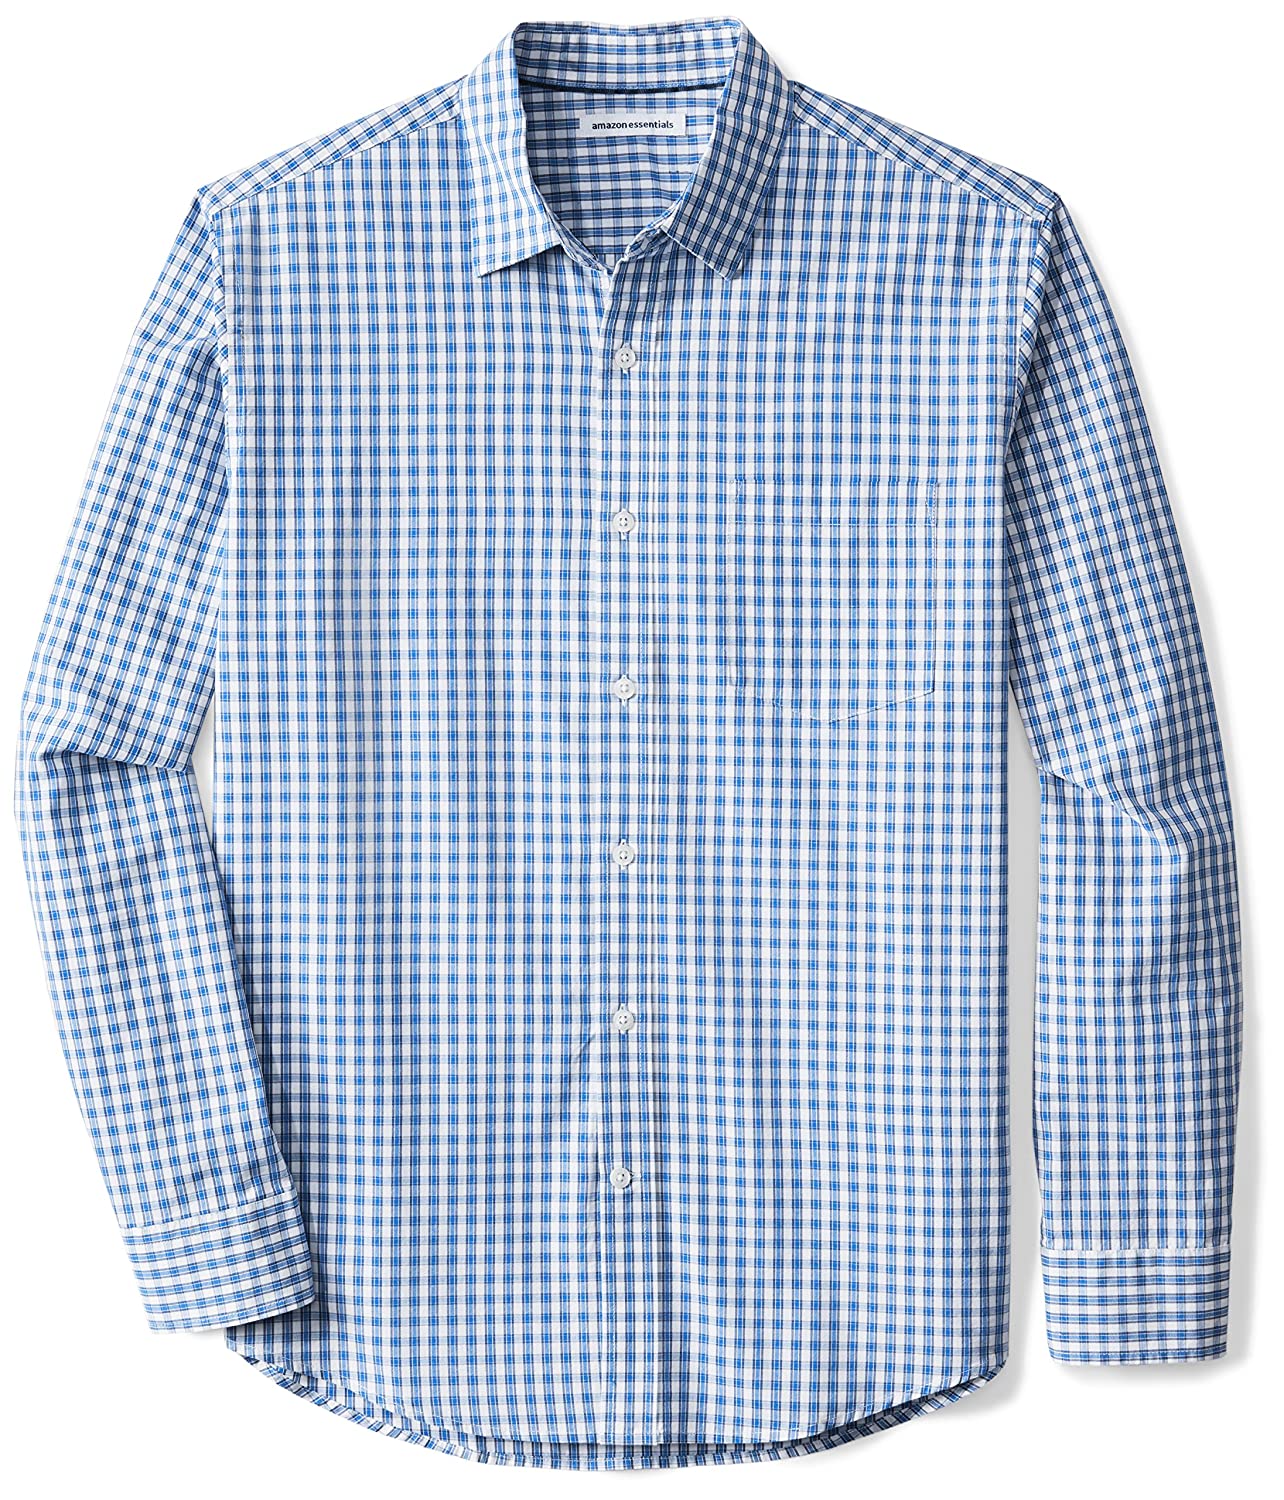 Essentials Men's Regular-Fit Long-Sleeve Casual, Blue Check, Size Large ...